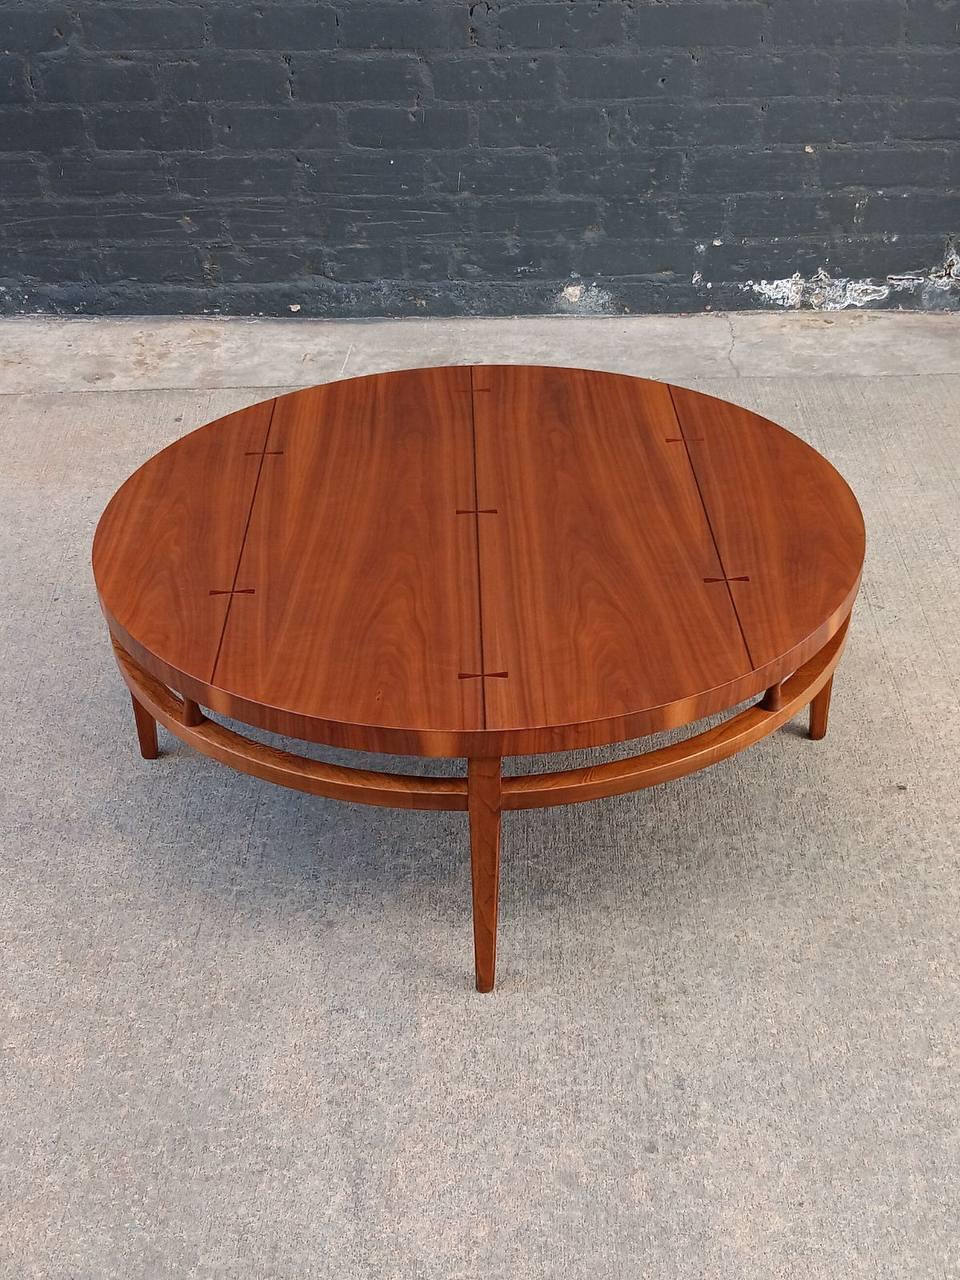 Newly Refinished -Mid-Century Modern Walnut Coffee Table Inlaid Bowtie Rosewood  In Excellent Condition For Sale In Los Angeles, CA